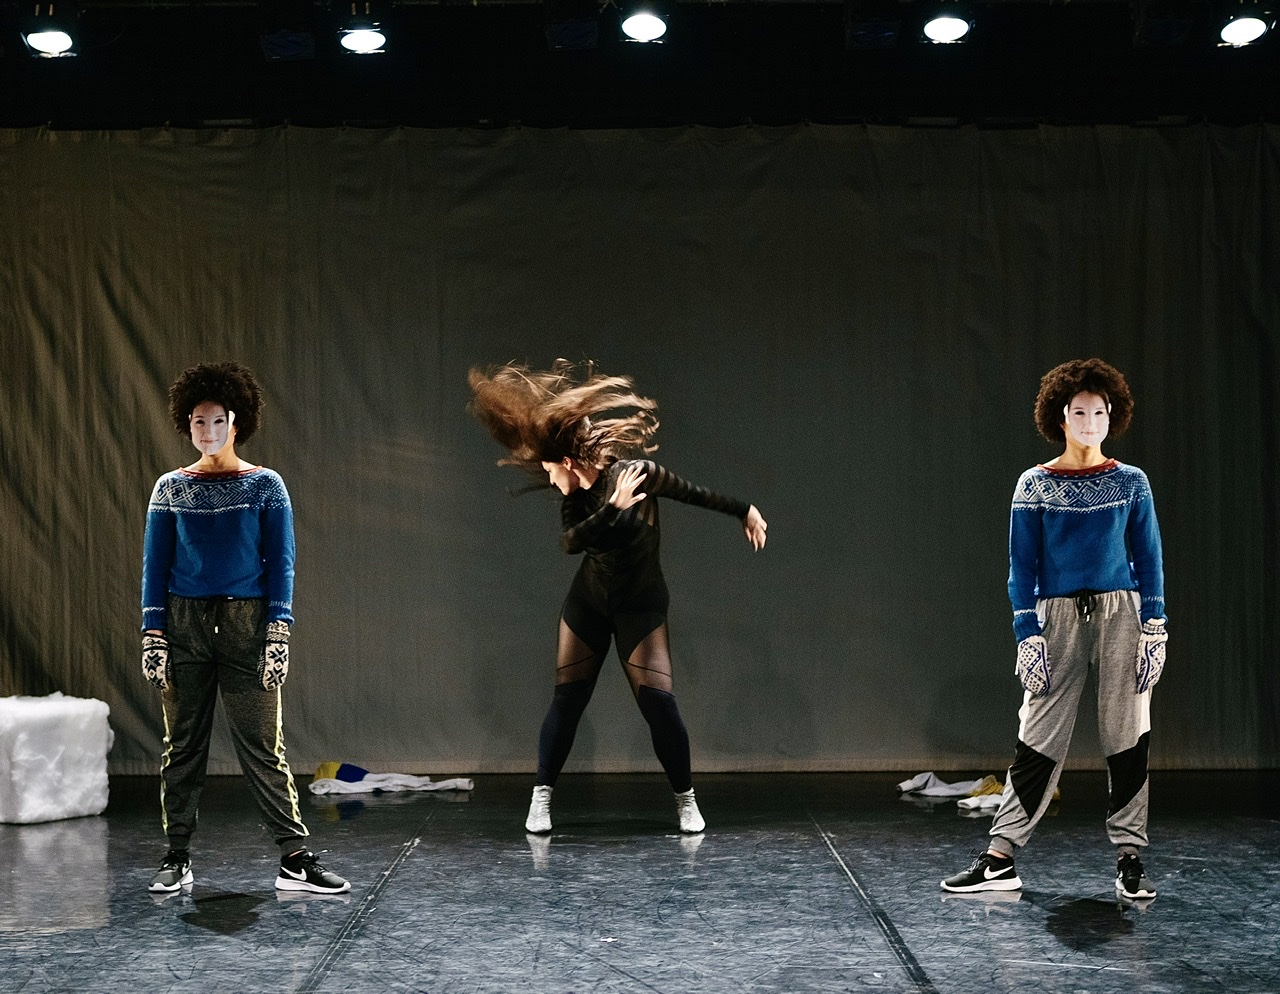 Two women with masks and Nordic sweaters stand like sentries on either side of a writhing dancer